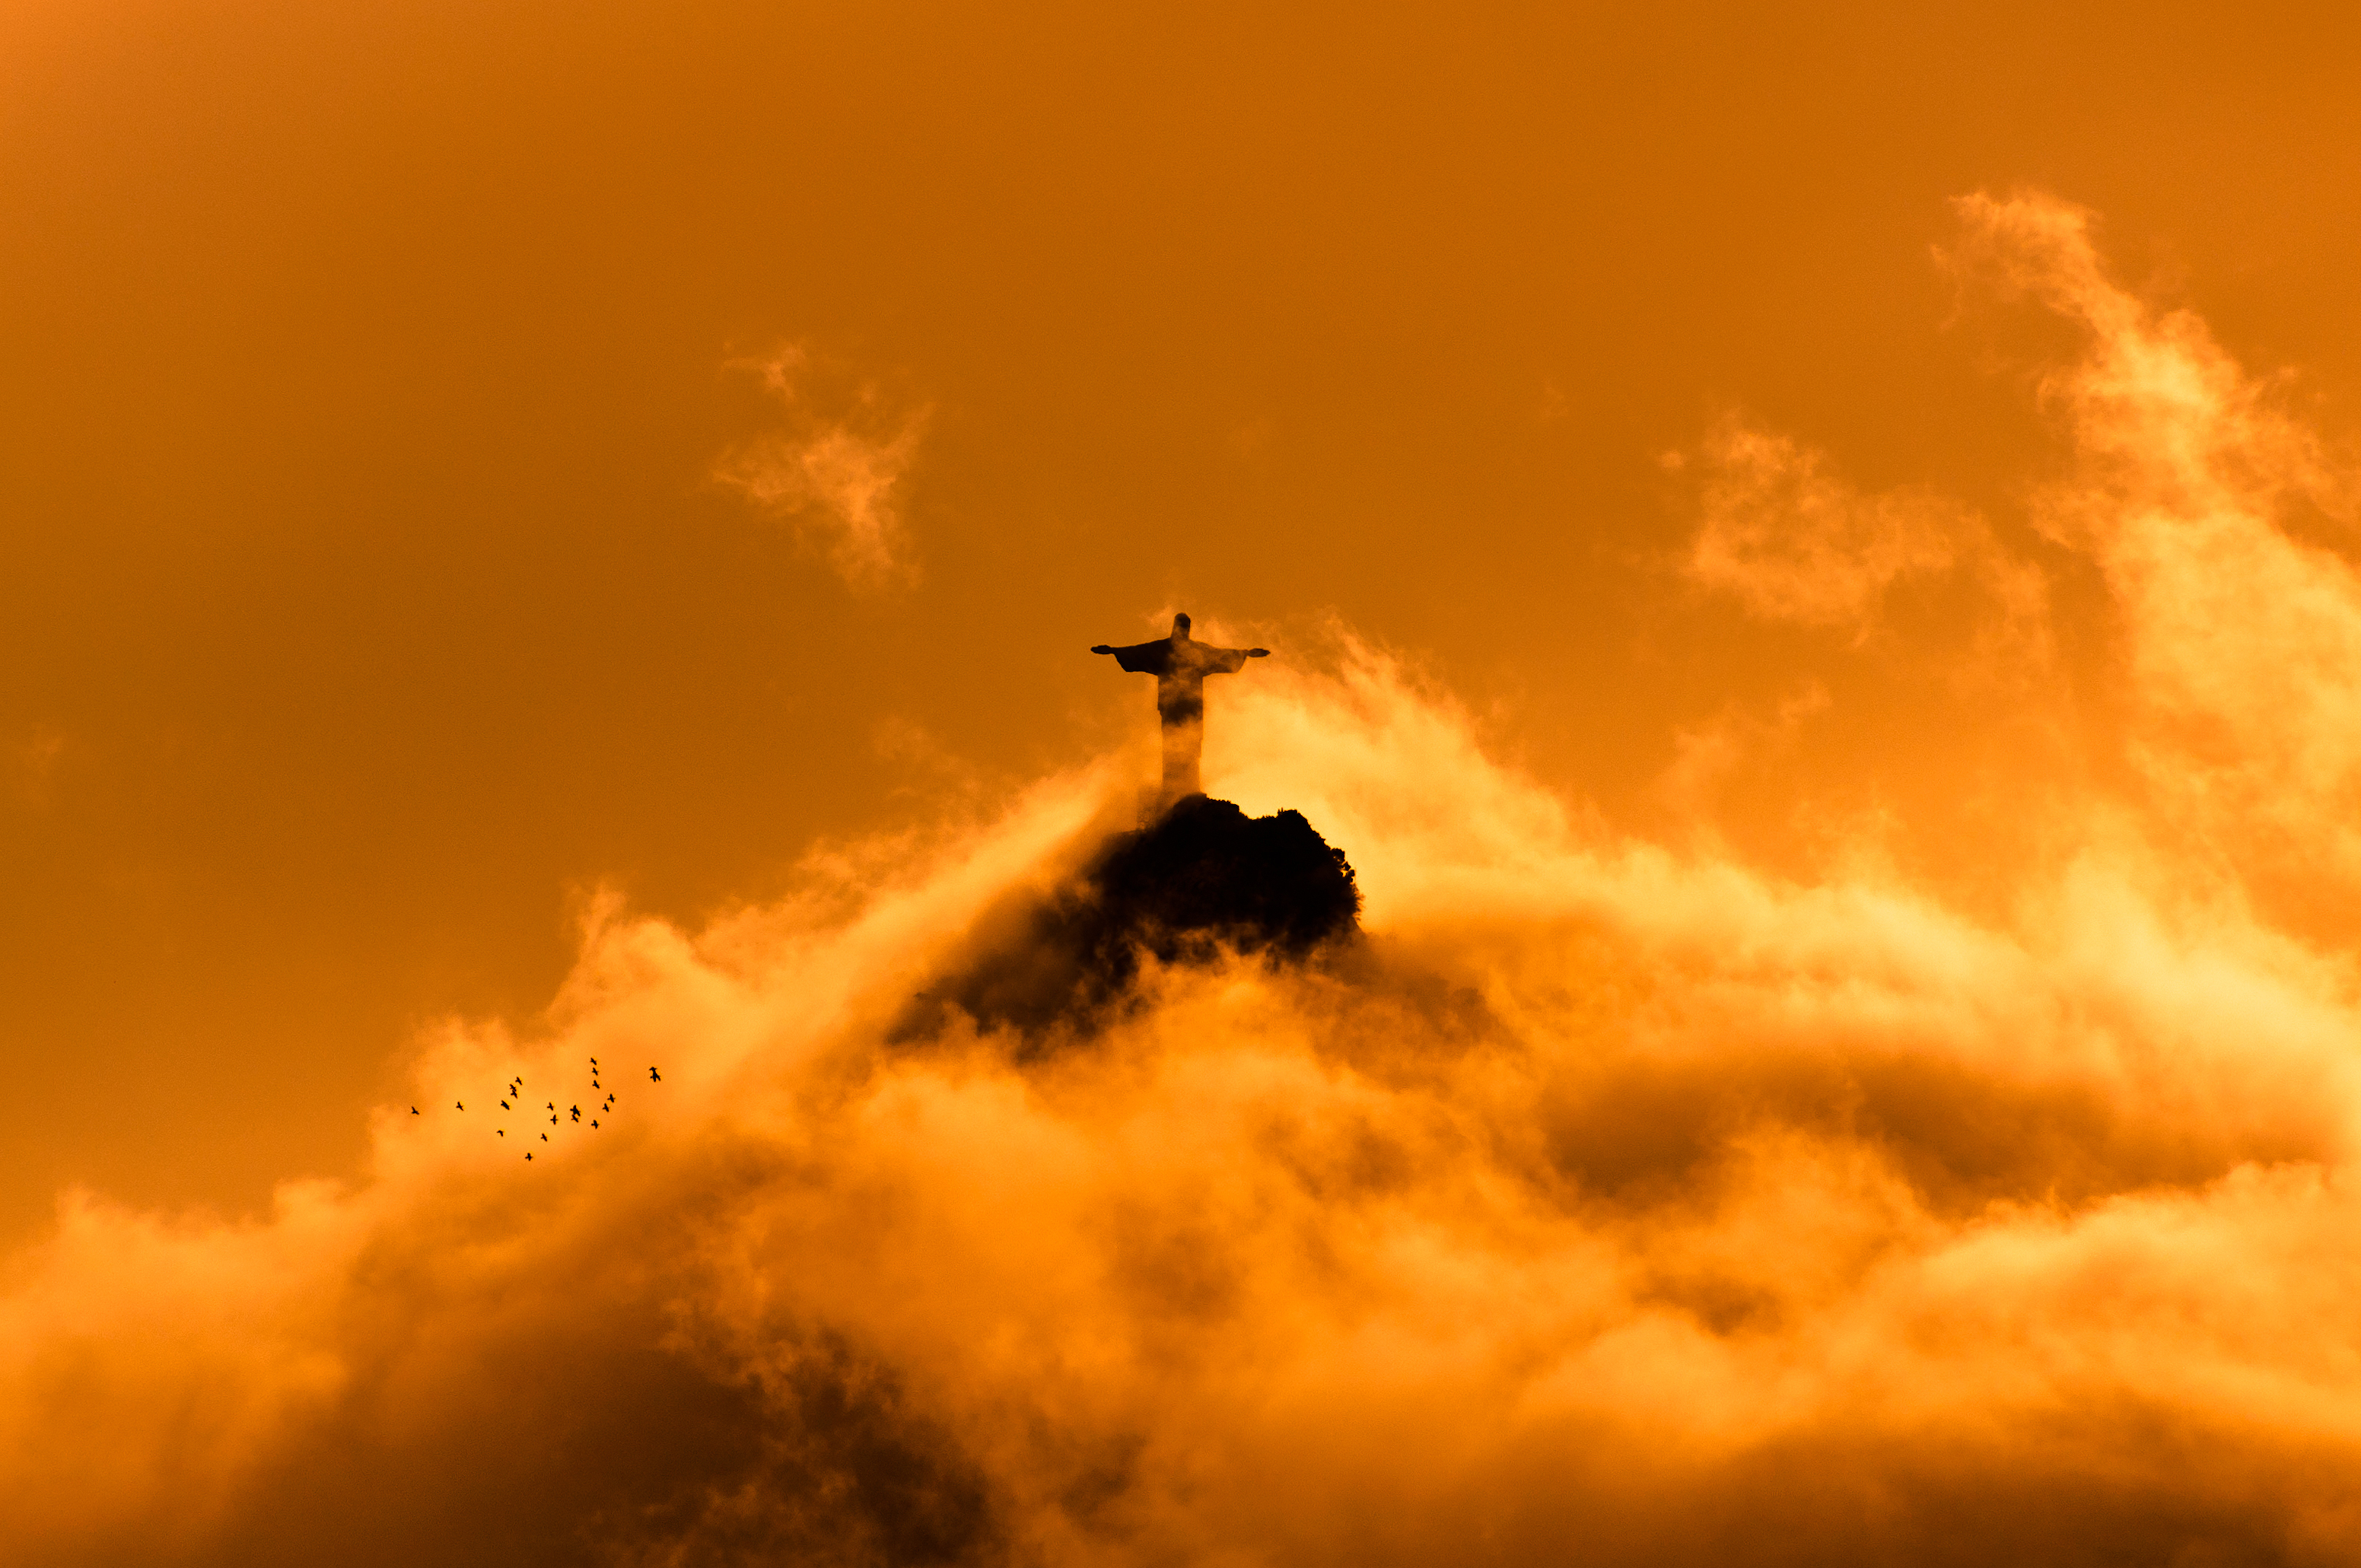 Jesus in Clouds by Sunset 2